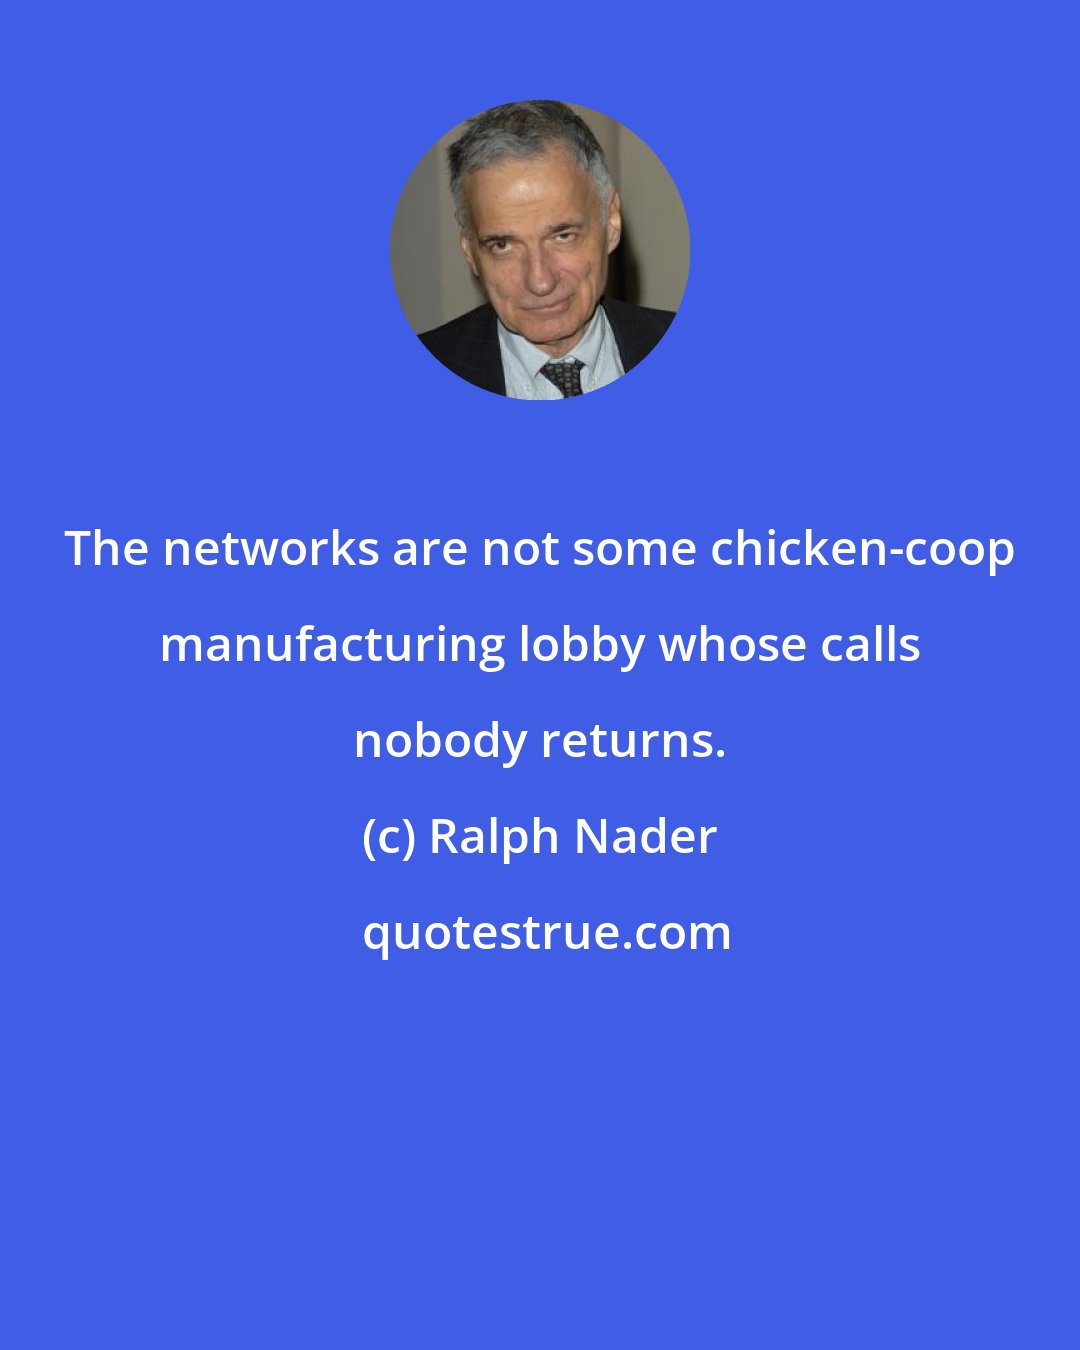 Ralph Nader: The networks are not some chicken-coop manufacturing lobby whose calls nobody returns.